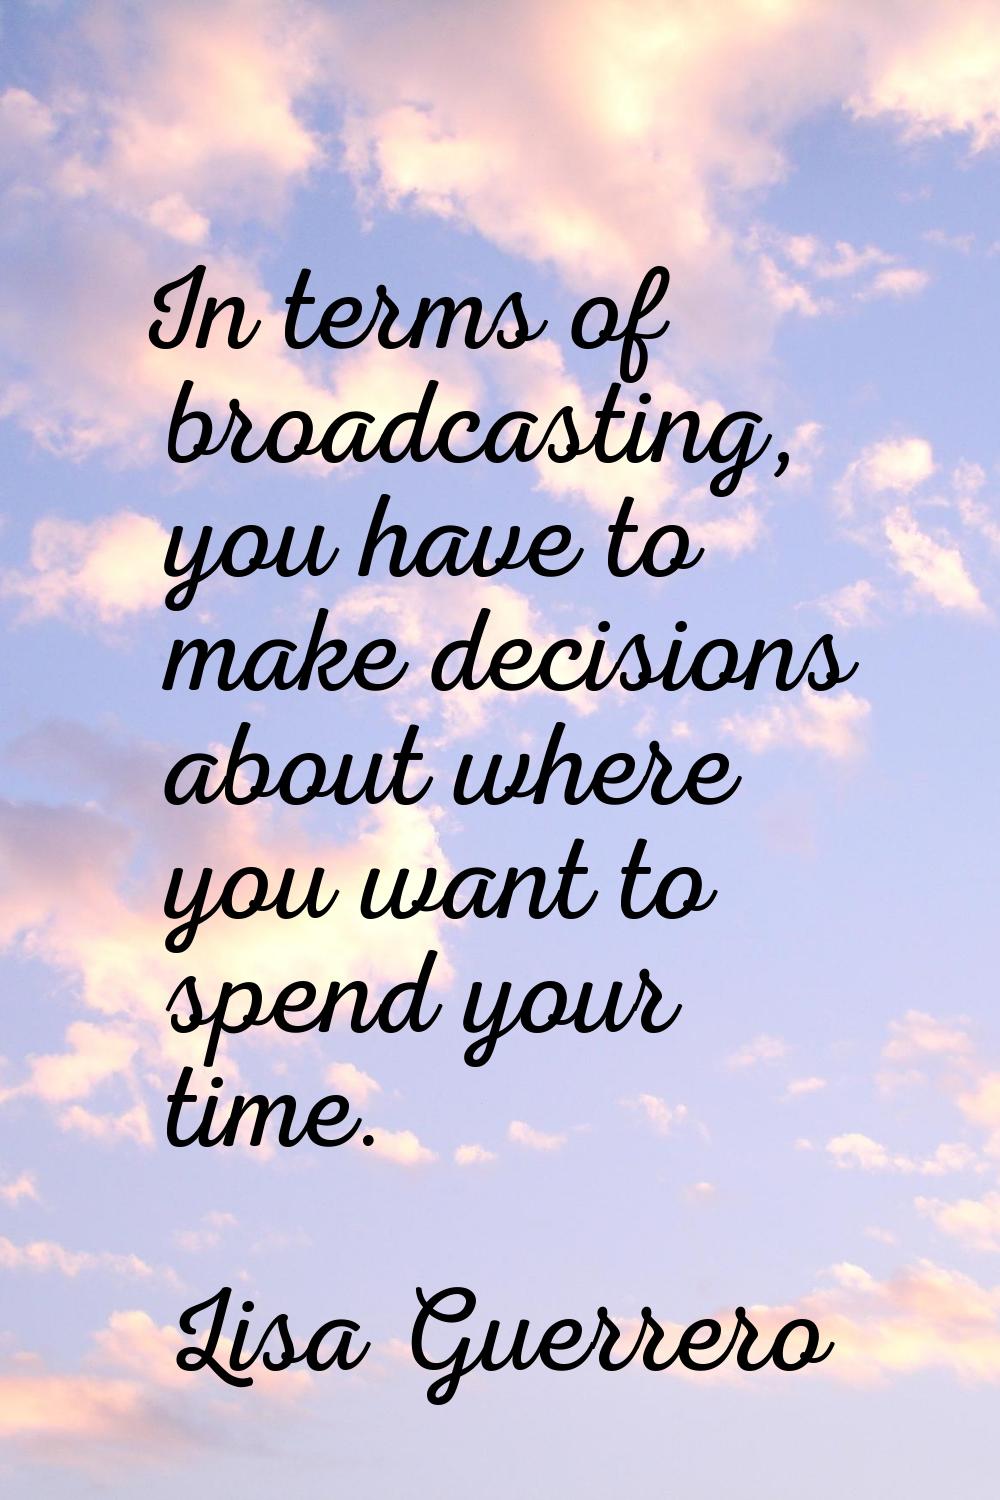 In terms of broadcasting, you have to make decisions about where you want to spend your time.